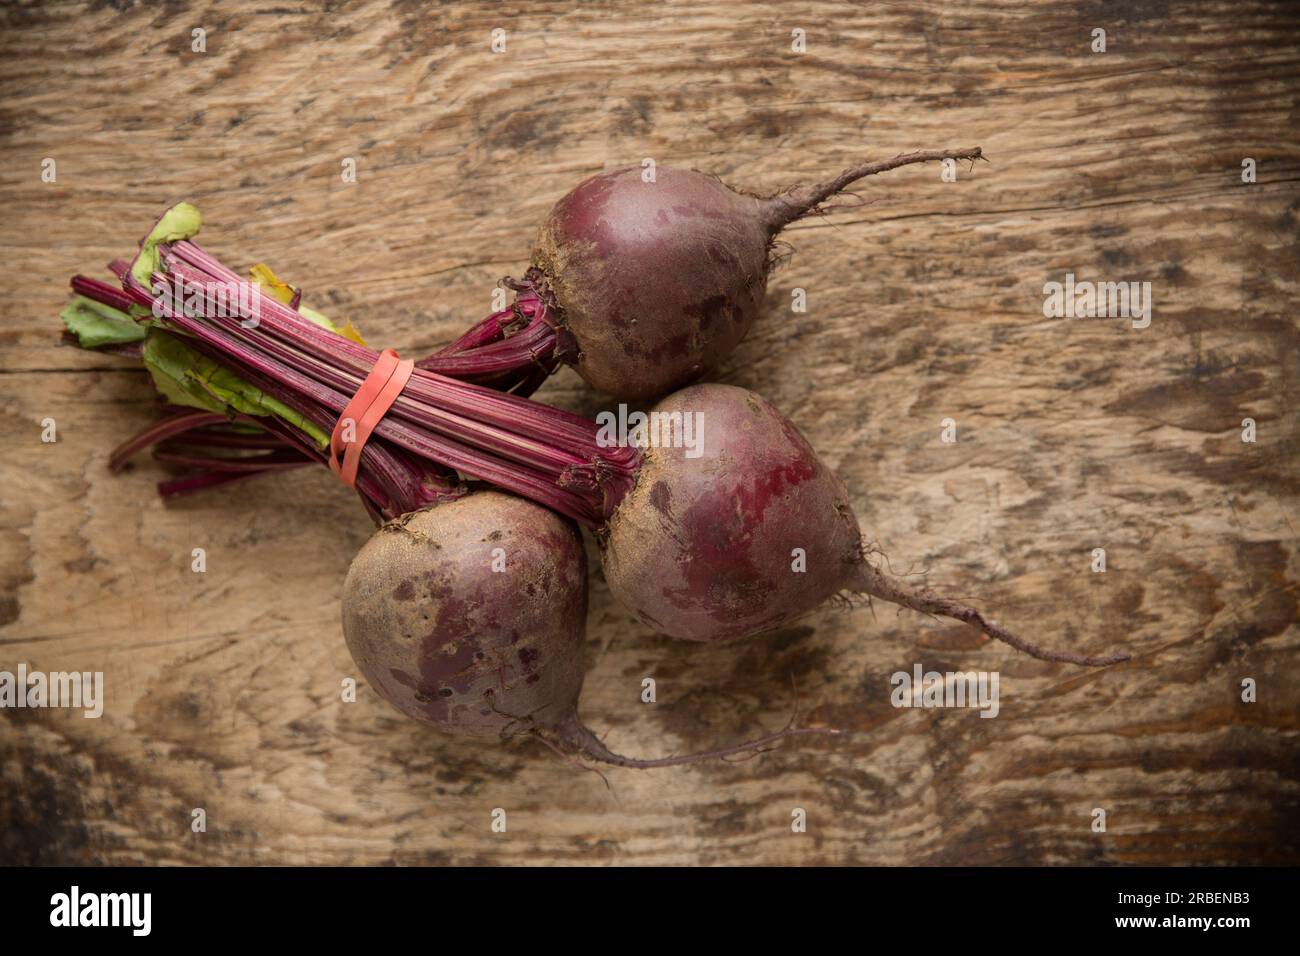 Three whole raw beetroot from a supermarket in the UK that will be used to make Borscht soup. England UK GB Stock Photo